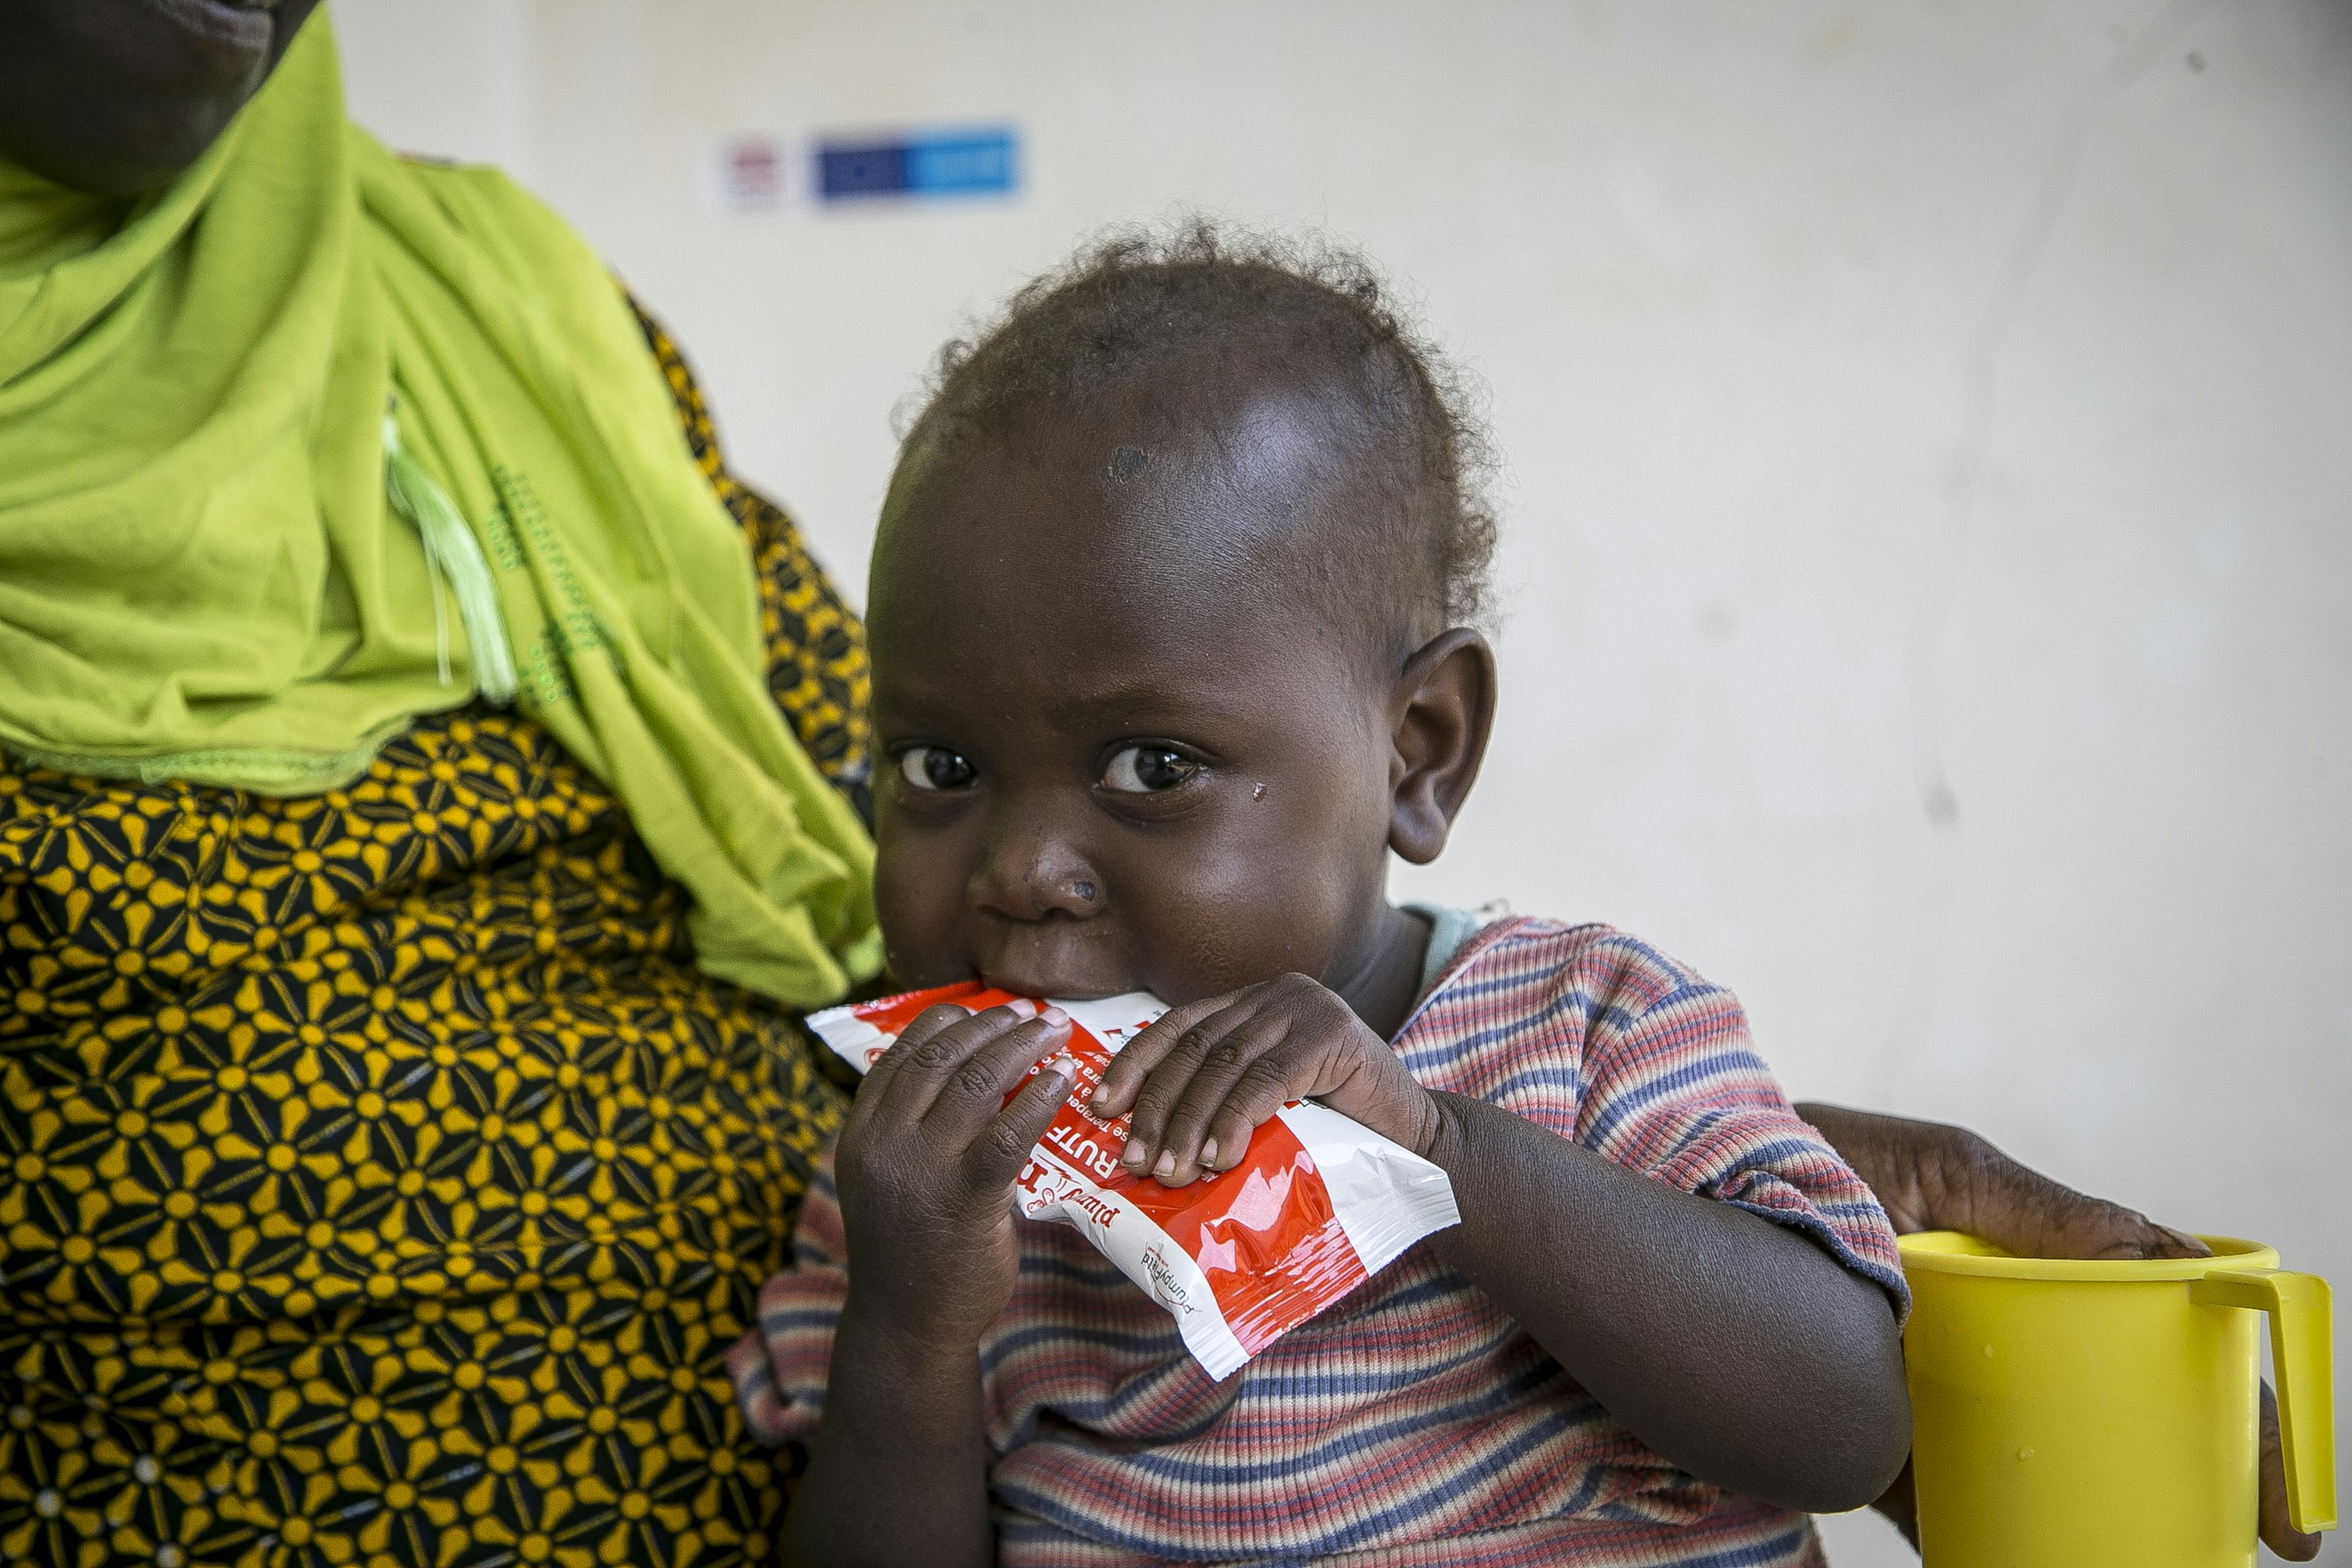 Oumou Bah, 2, eating ready-to-use therapeutic food